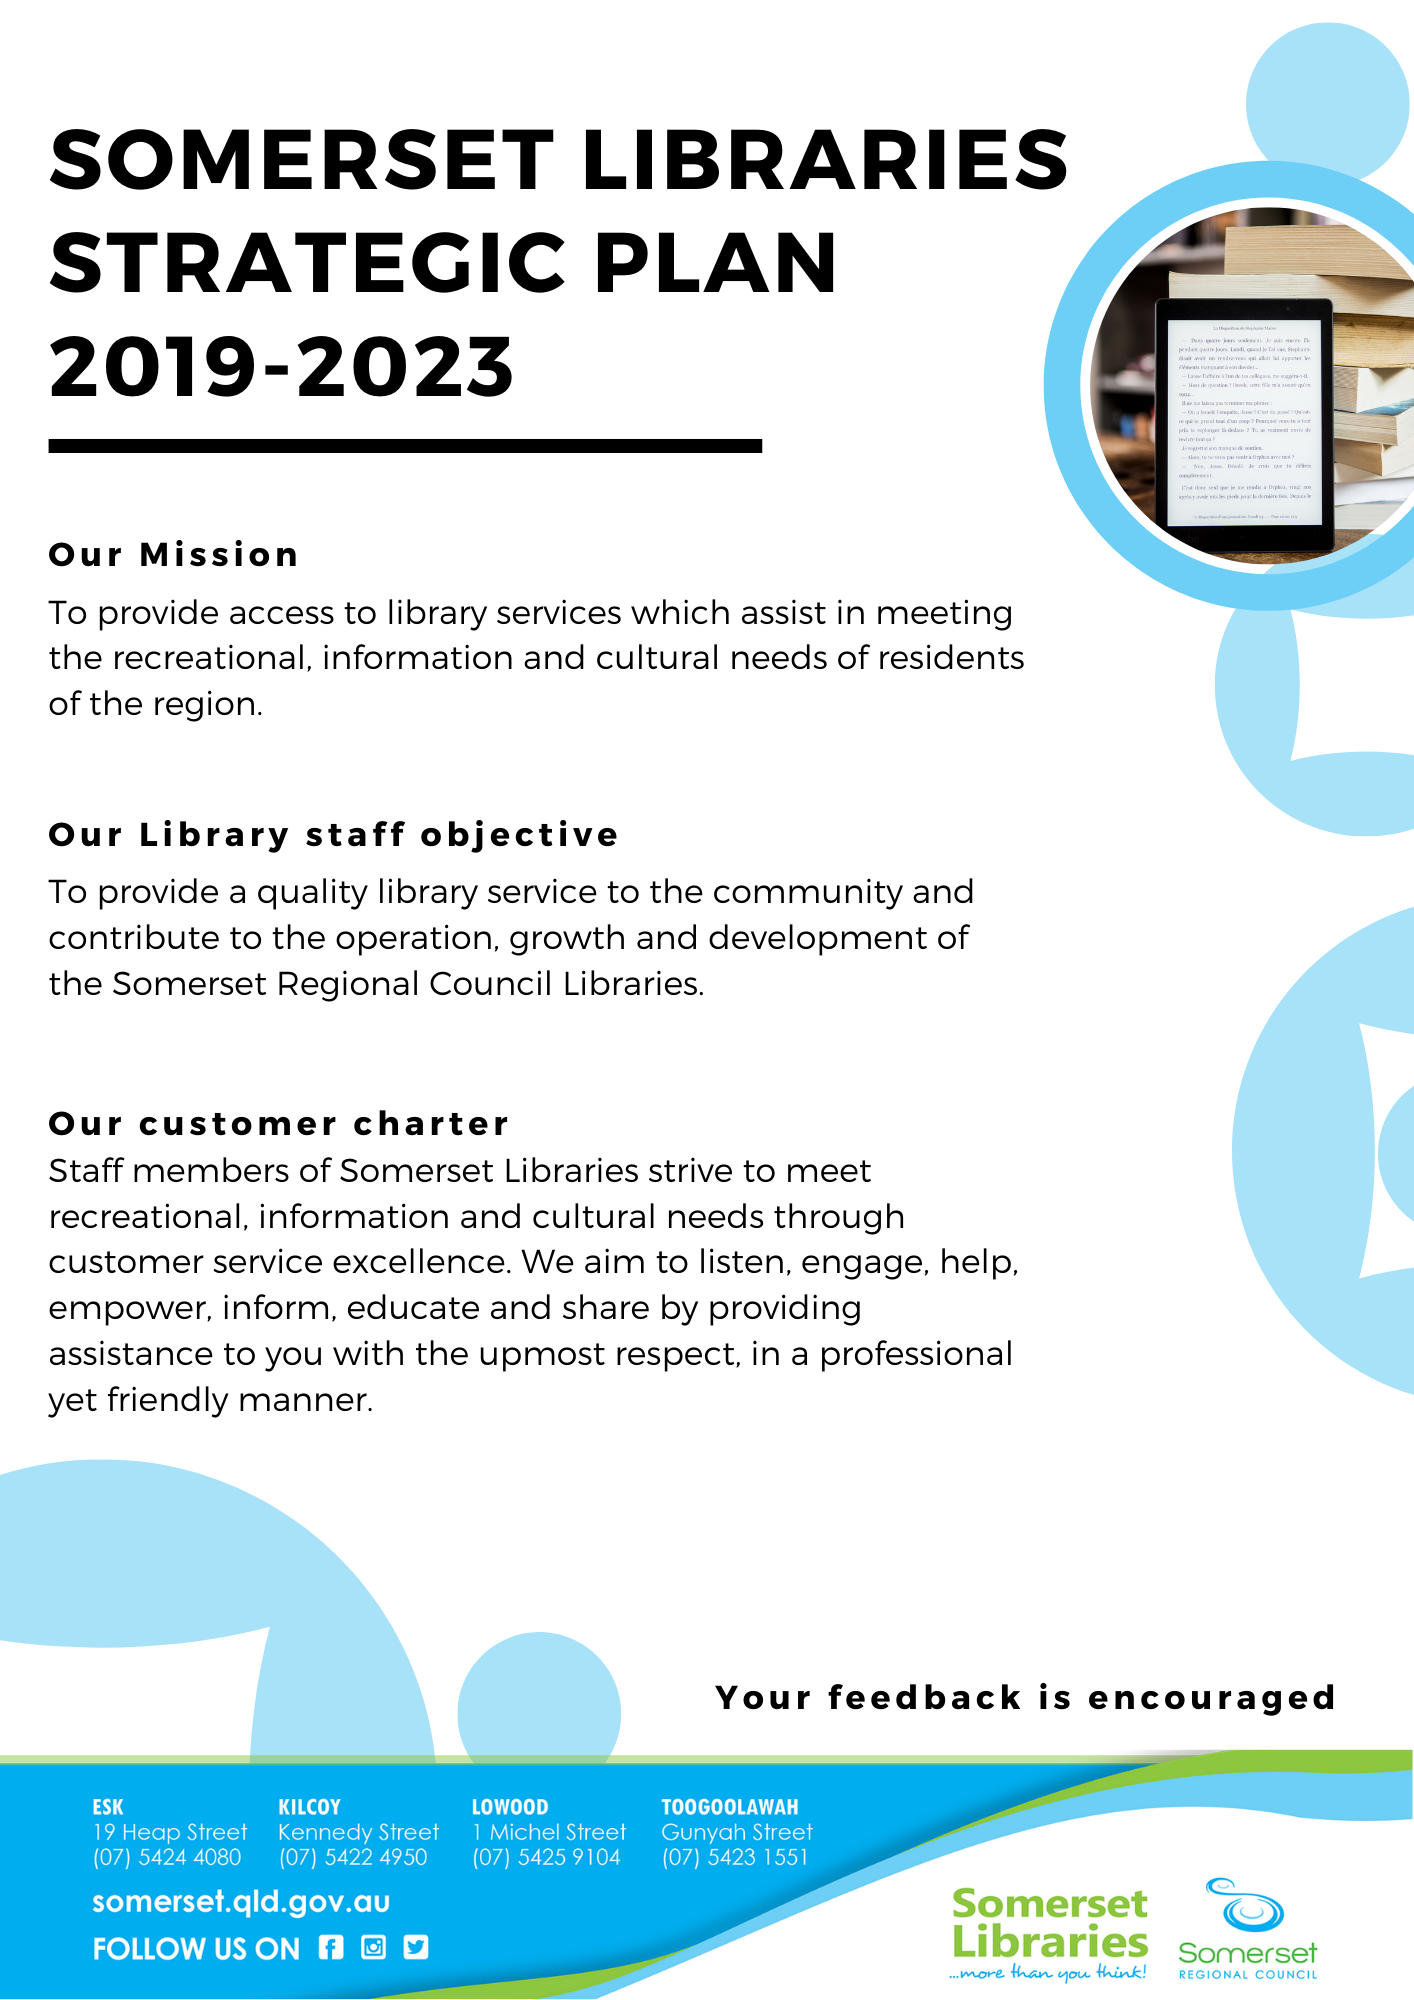 Somerset Libraries Strategic Plan
2019-2023
Our Mission: To provide access to library services which assist in meeting the recreational, information and cultural needs of residents of the region.
Our Library staff objective: To provide a quality library service to the community and contribute to the operation, growth and development of the Somerset Regional Council Libraries.
Our customer charter: Staff members of Somerset Libraries strive to meet recreational, information and cultural needs through customer service excellence. We aim to listen, engage, help, empower, inform, educate and share by providing assistance to you with the upmost respect, in a professional yet friendly manner.